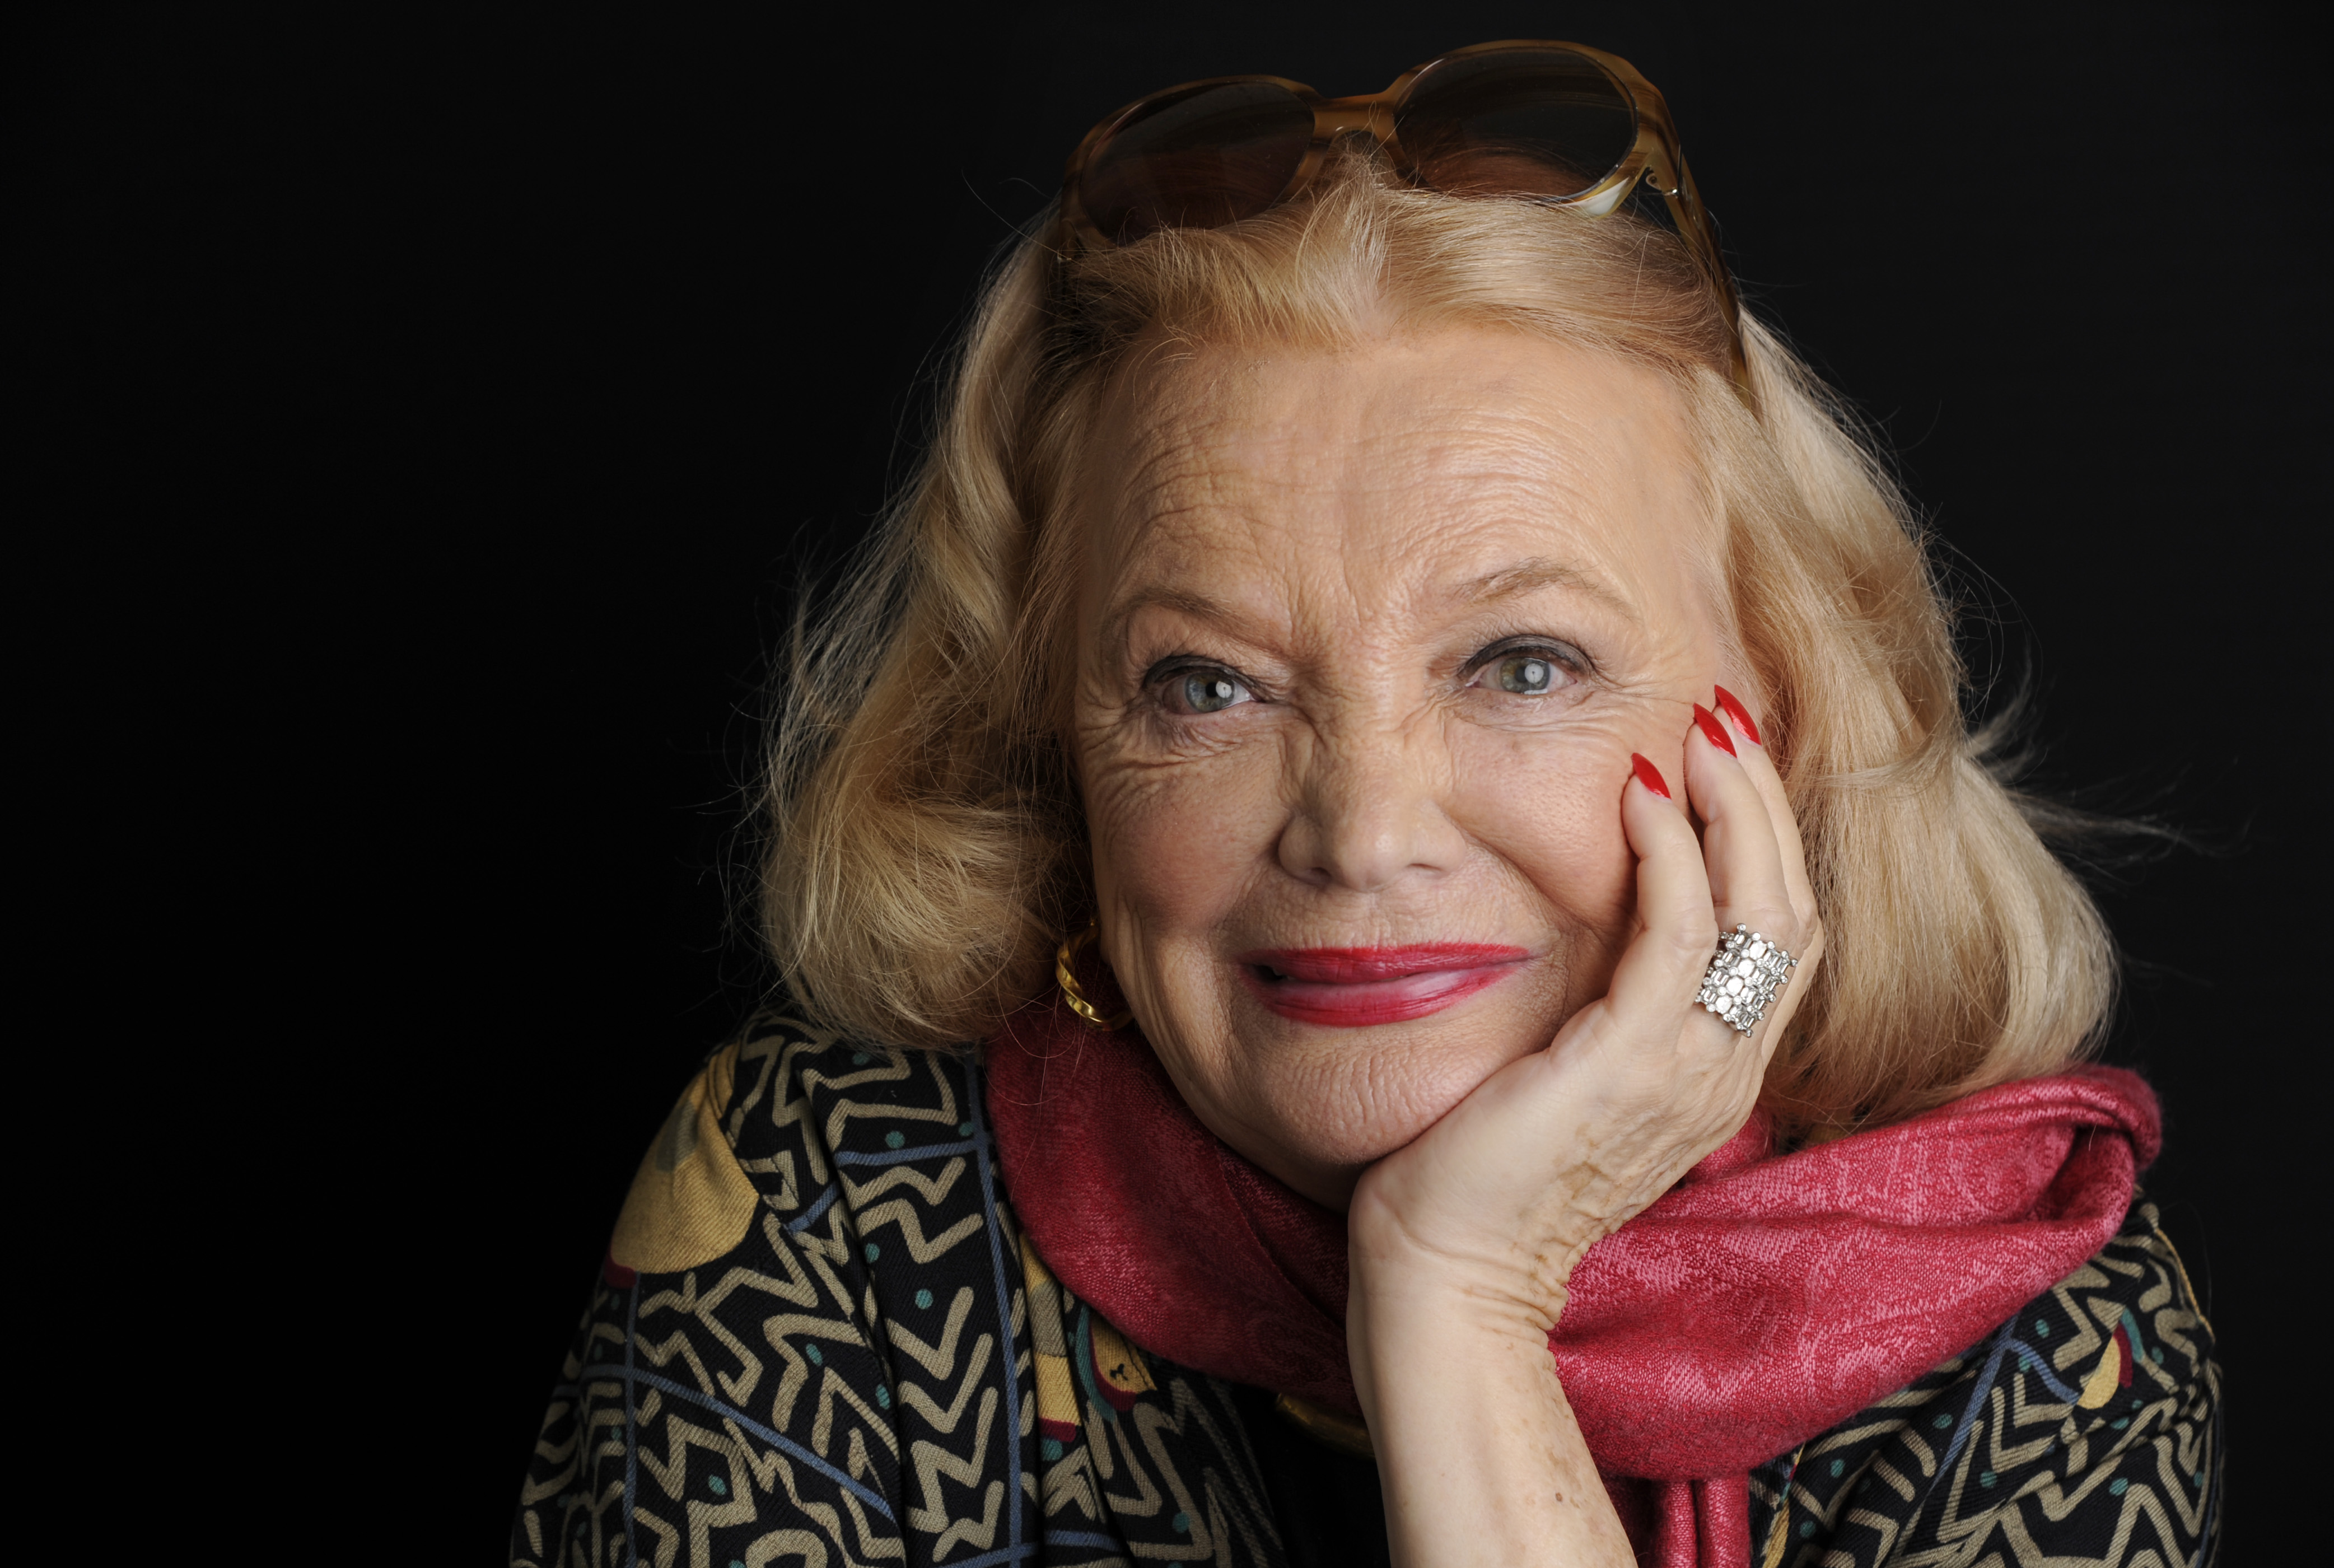 In this Thursday, Dec. 4, 2014 photo, actress Gena Rowlands poses for a portrait at the London West Hollywood hotel in West Hollywood, Calif. Oscar-nominated actress Rowlands stars in Six Dance Lessons in Six Weeks, a screen adaptation of the stage play, which opens in cinemas this weekend. (Photo by Chris Pizzello/Invision/AP, File)